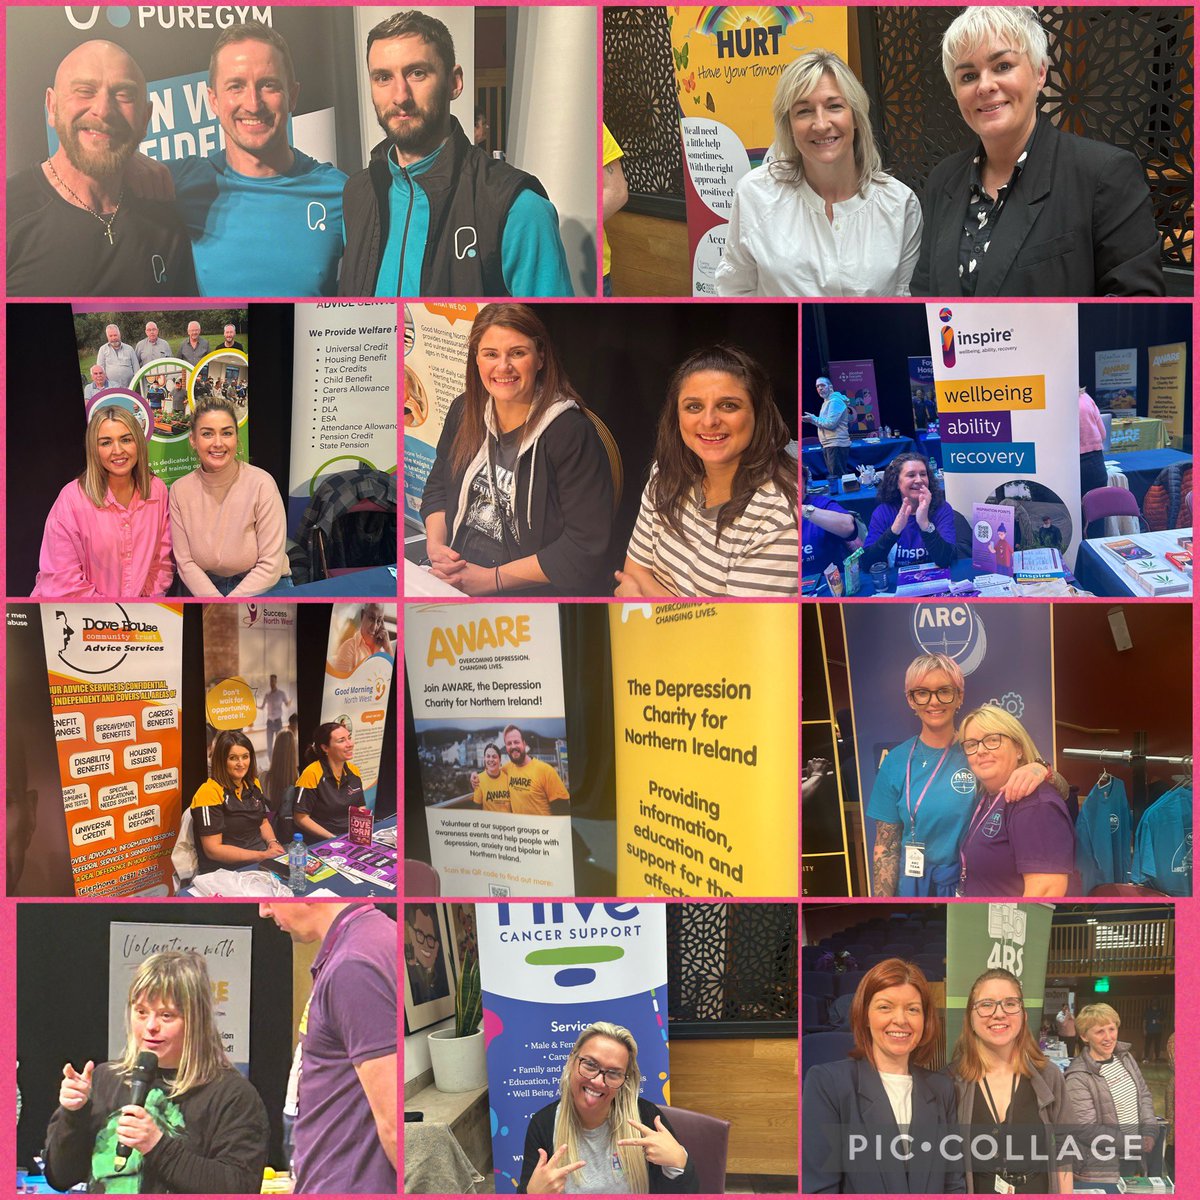 Delighted to get to @ARCFitness2’s #HealthFest in @MillenniumForum yesterday. The event sponsored by @derrycu brought together over 70 organisations in North West offering health services, addiction services & support. Míle buíochas to @FDSTrust for brilliant entertainment!